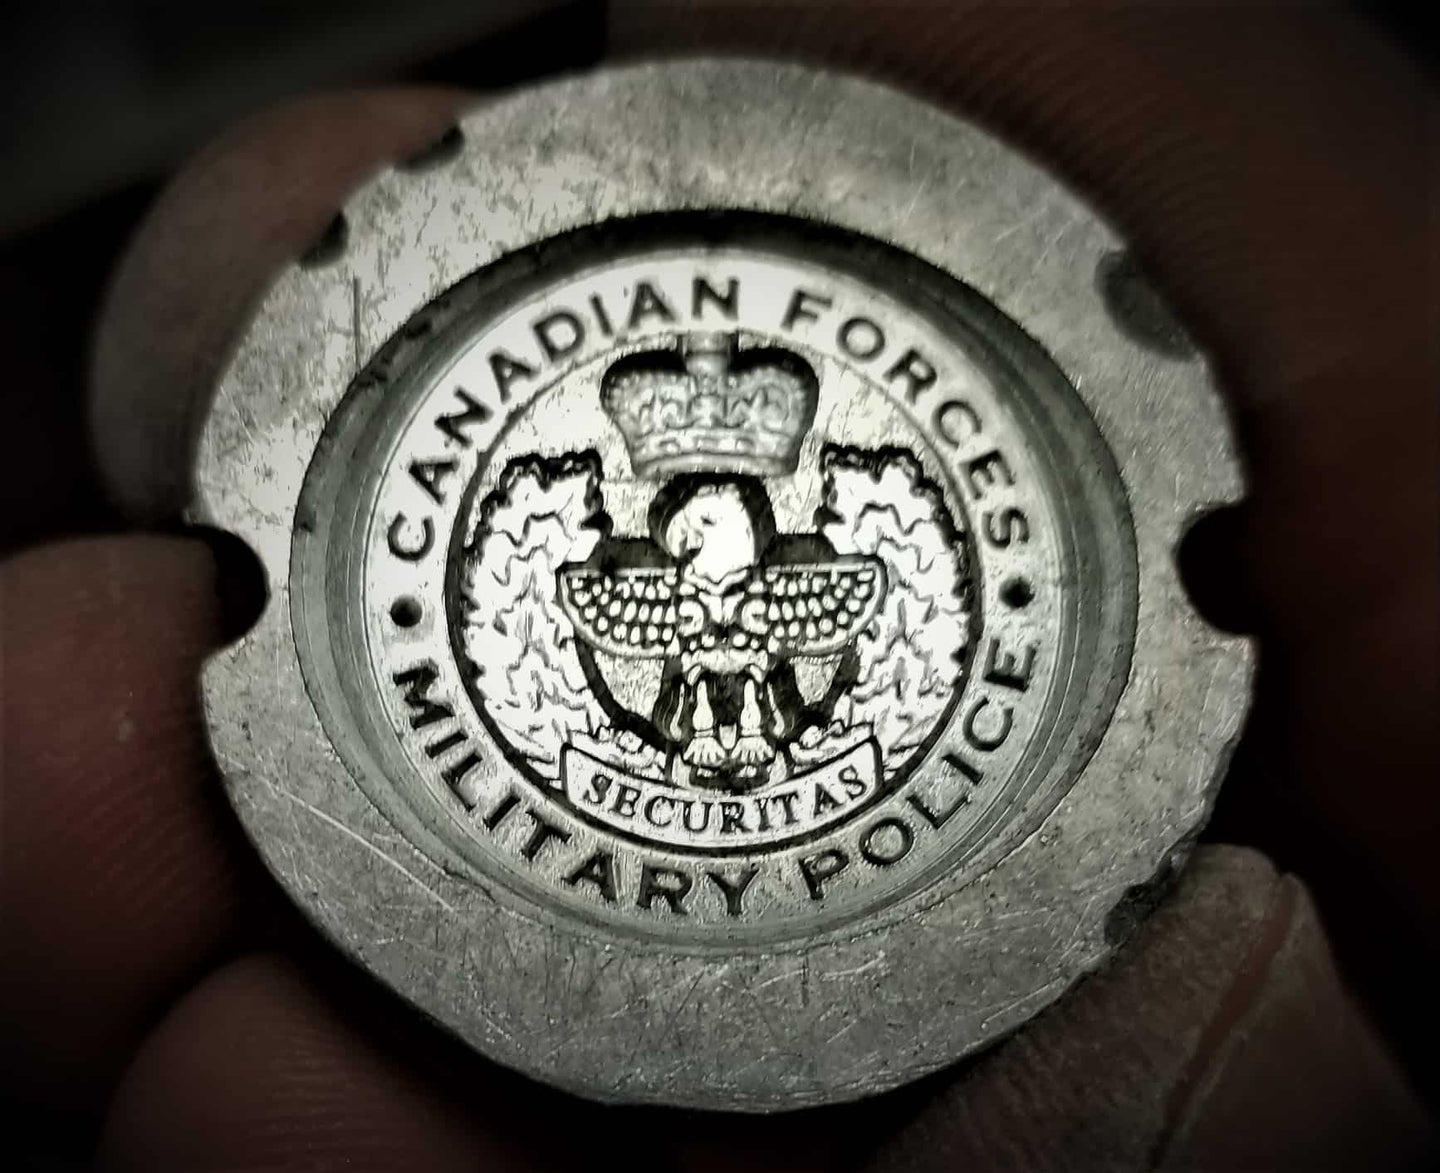 Canadian Forces Military Police Ring (Totem Pole Design)